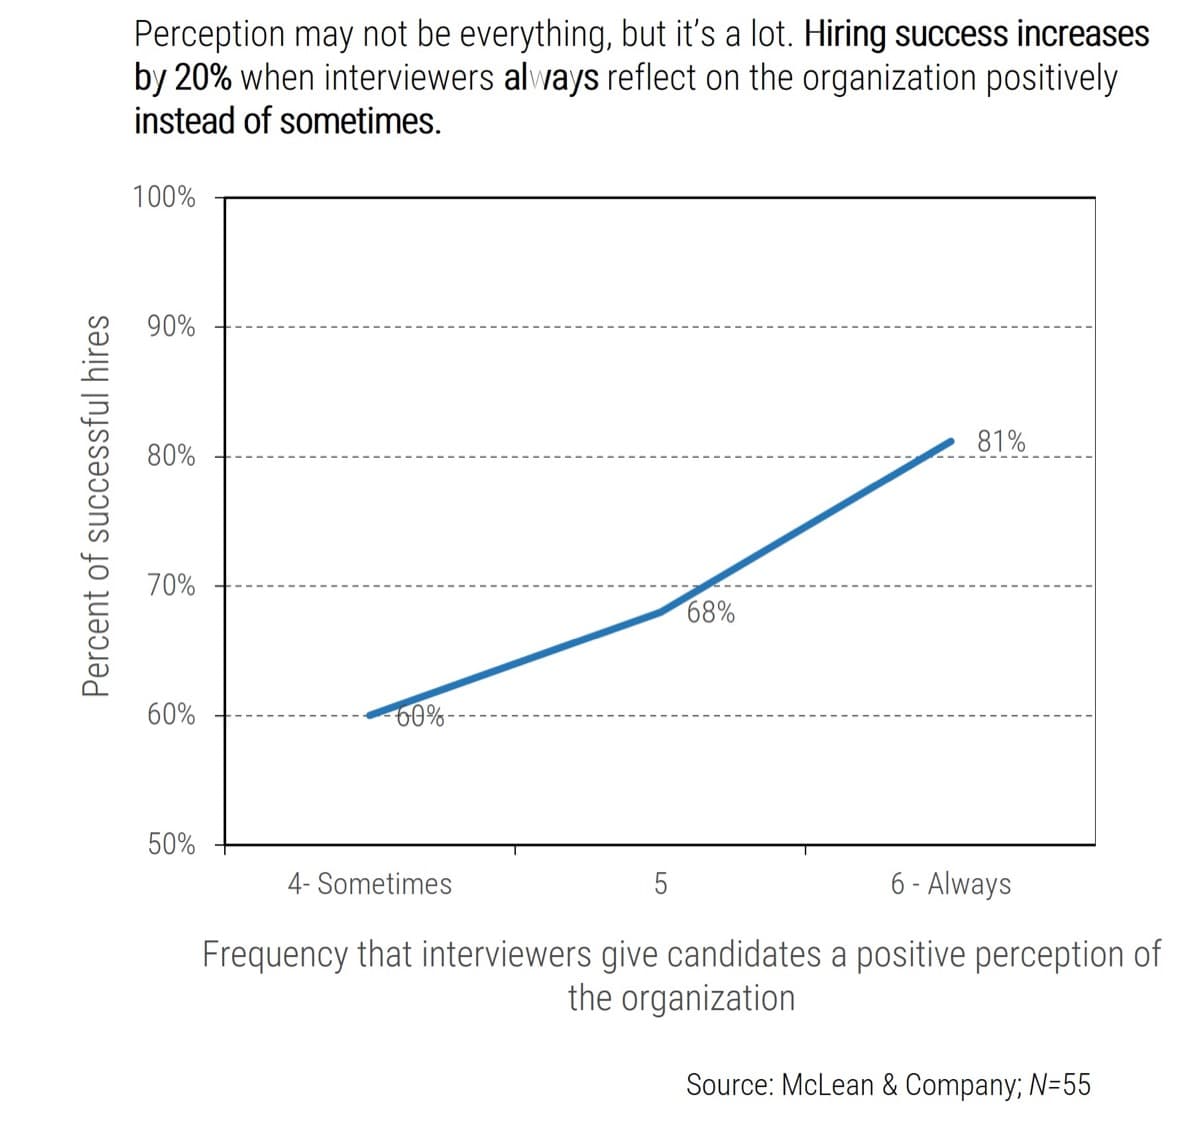 The image contains a screenshot of a graph to demonstrate the percent of successful hires relates strongly to interviewers giving candidates a positive perception of the organization.